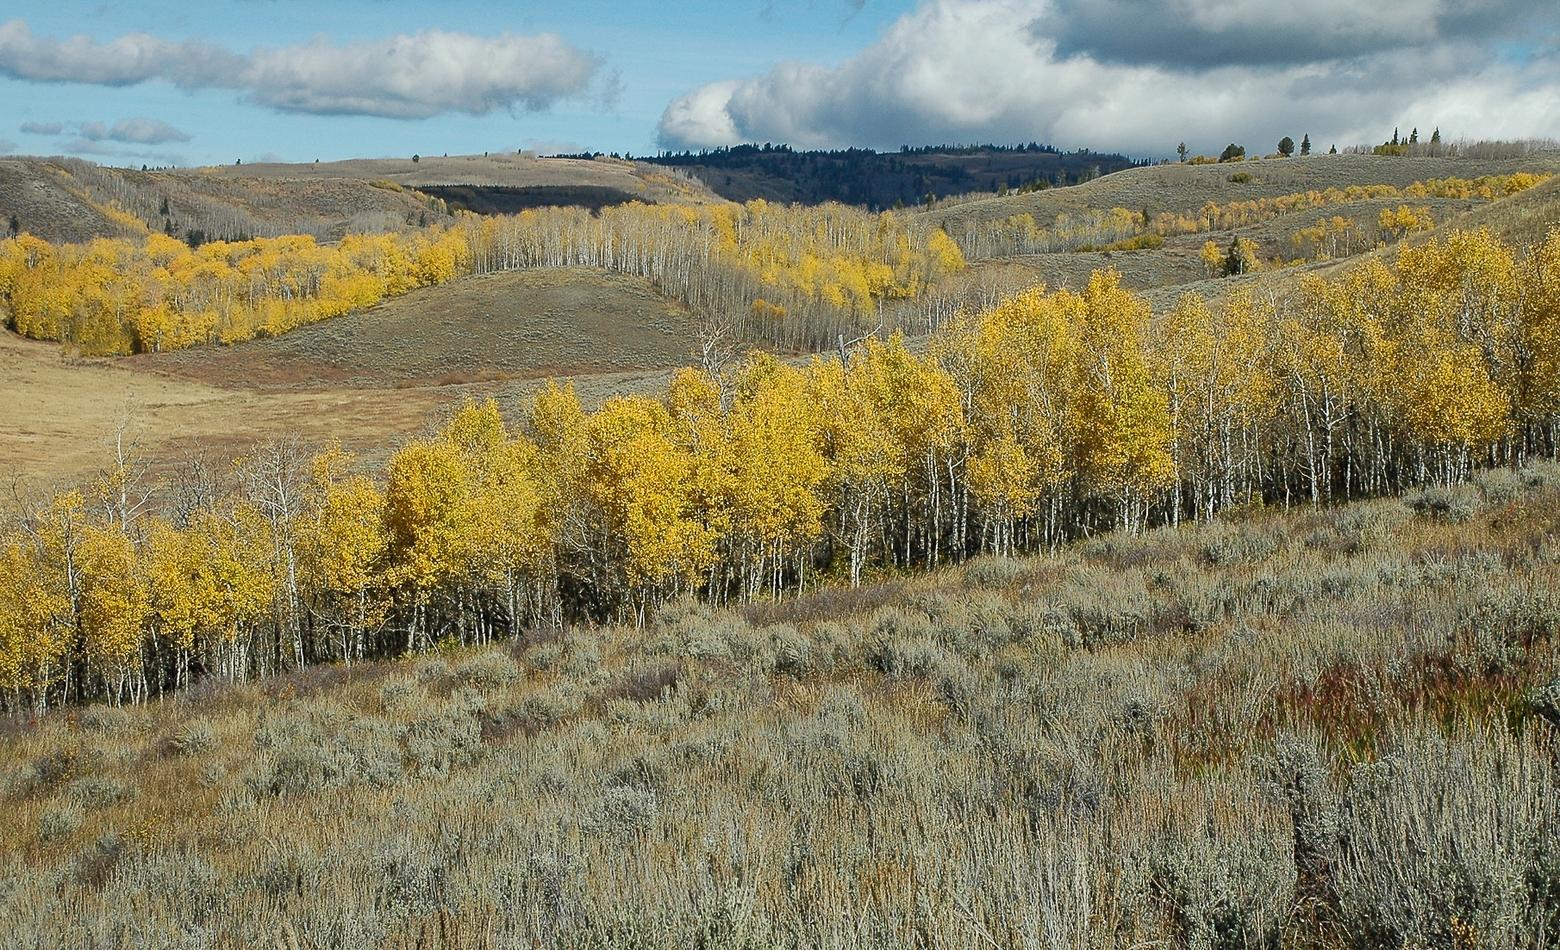 Aspen trees in the draws of the Kelly parcel. Photo by Susan Marsh